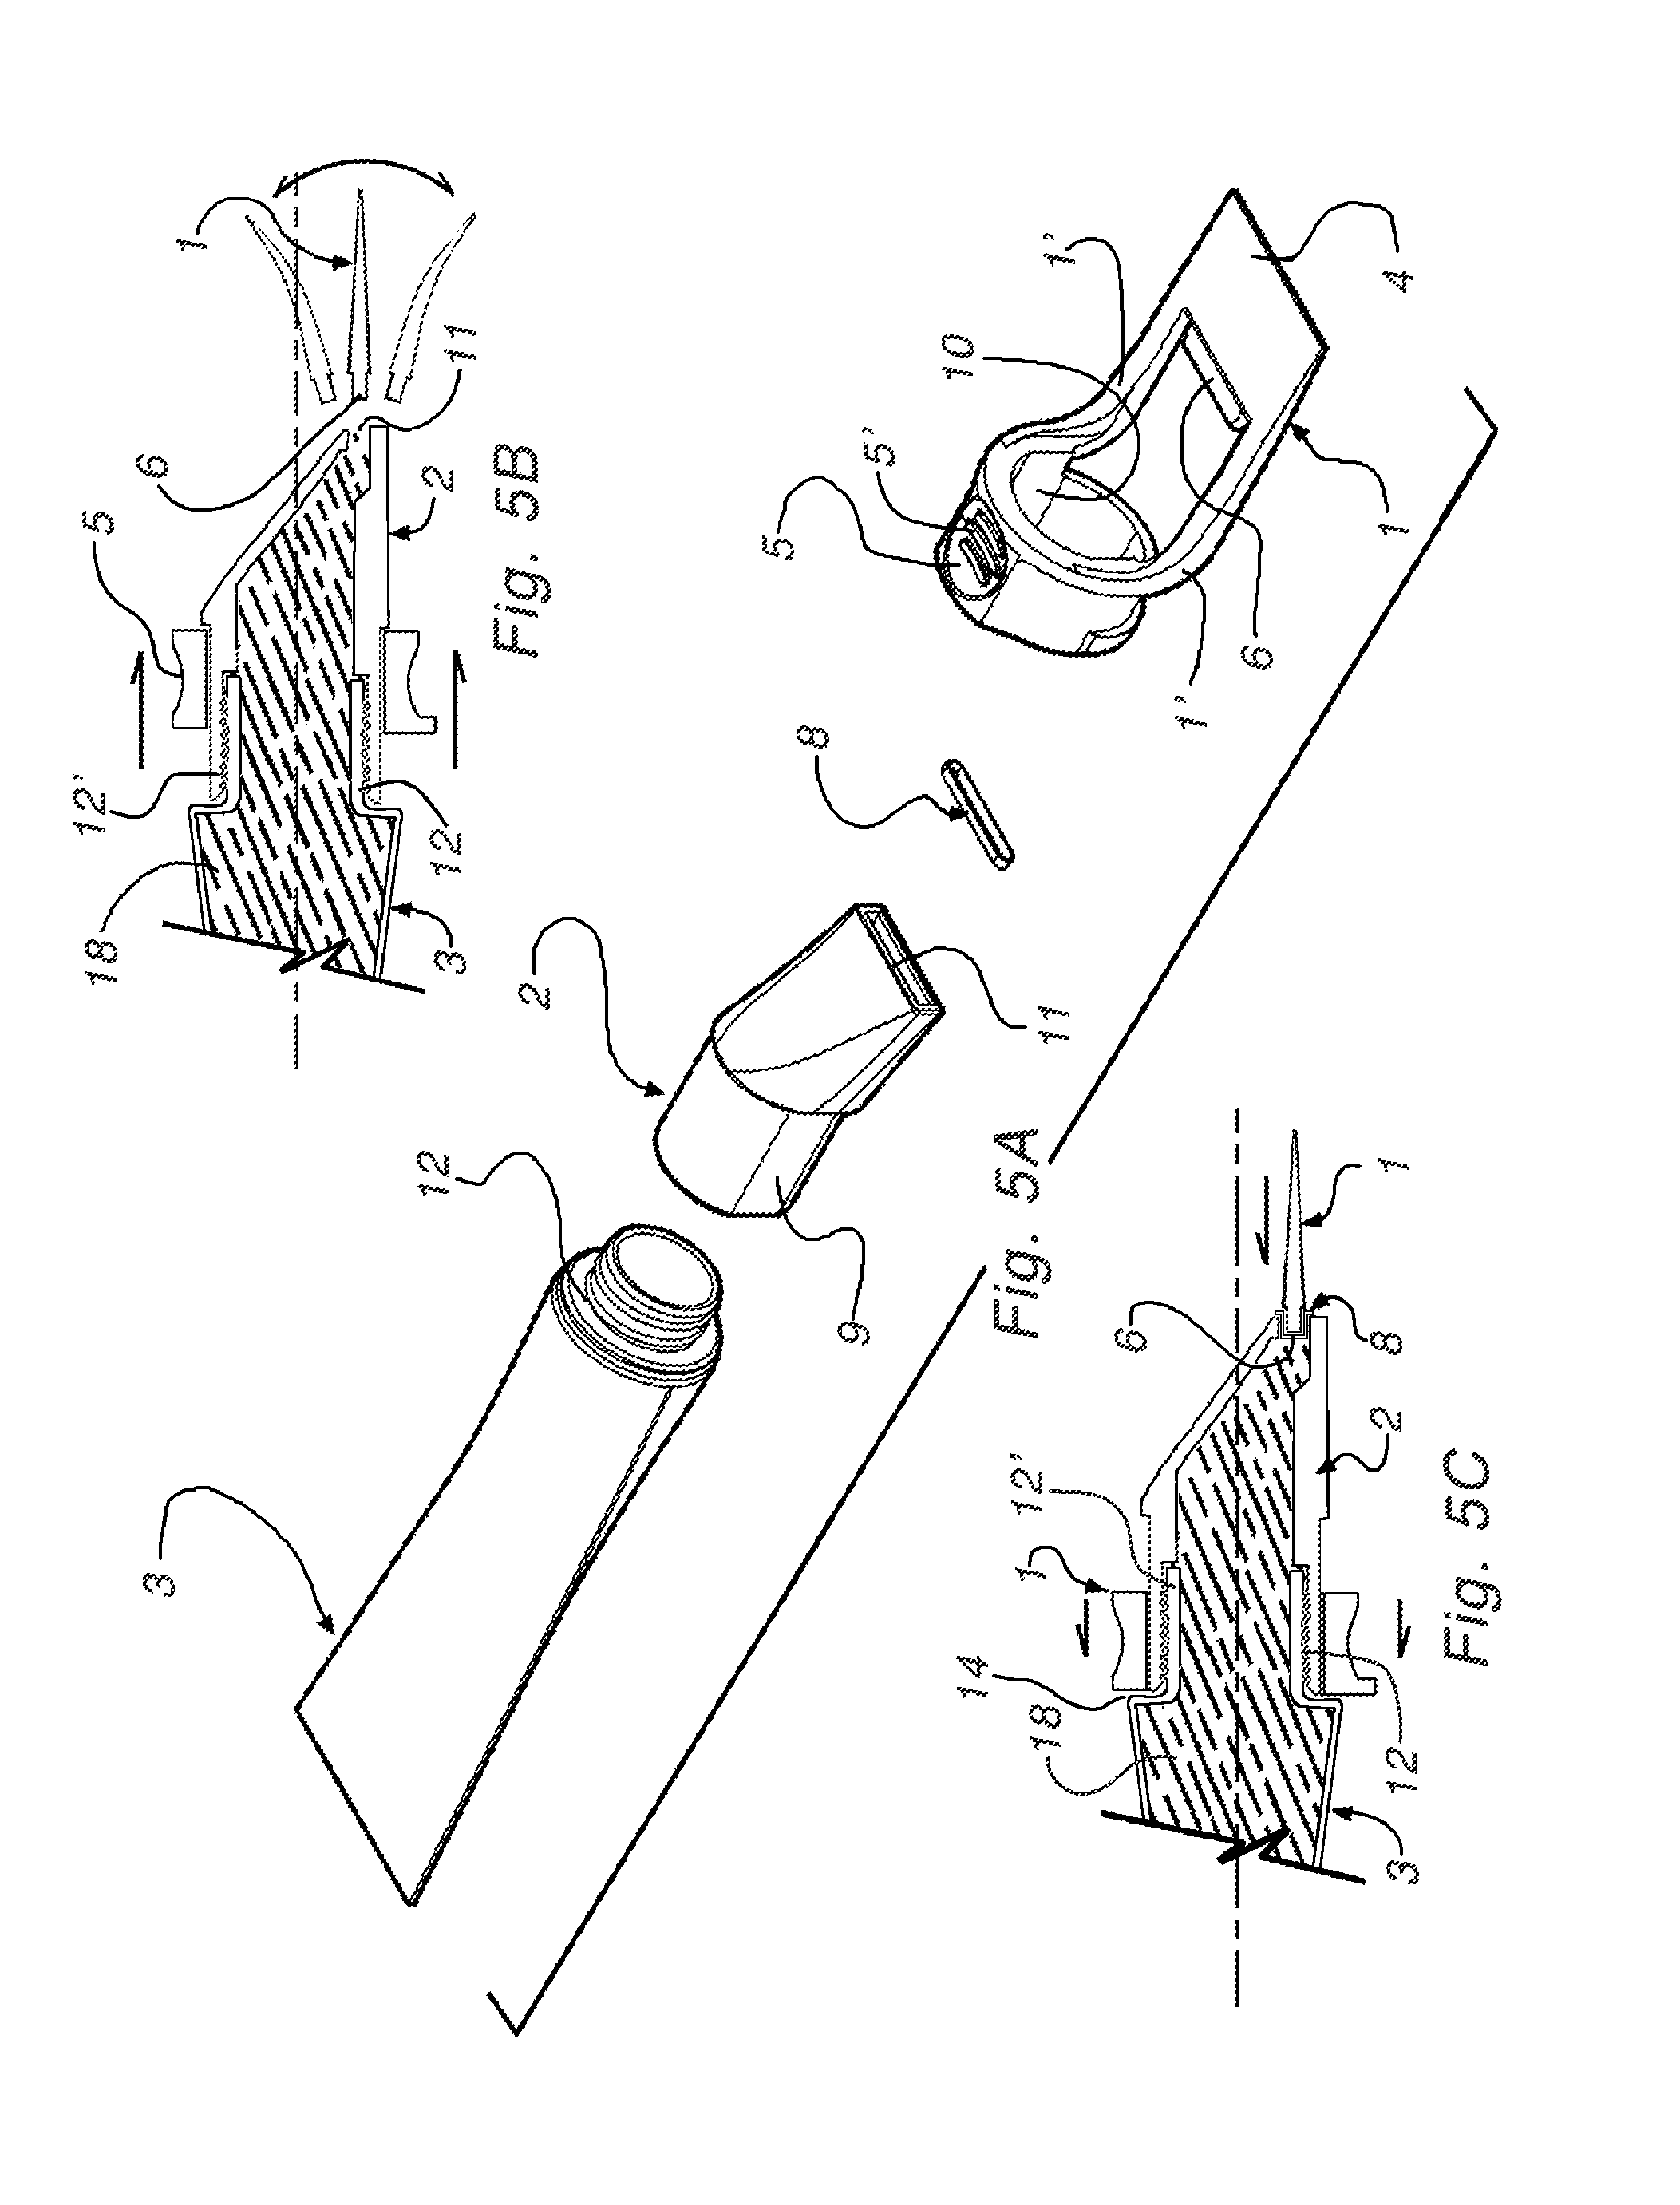 Repair compound delivery device